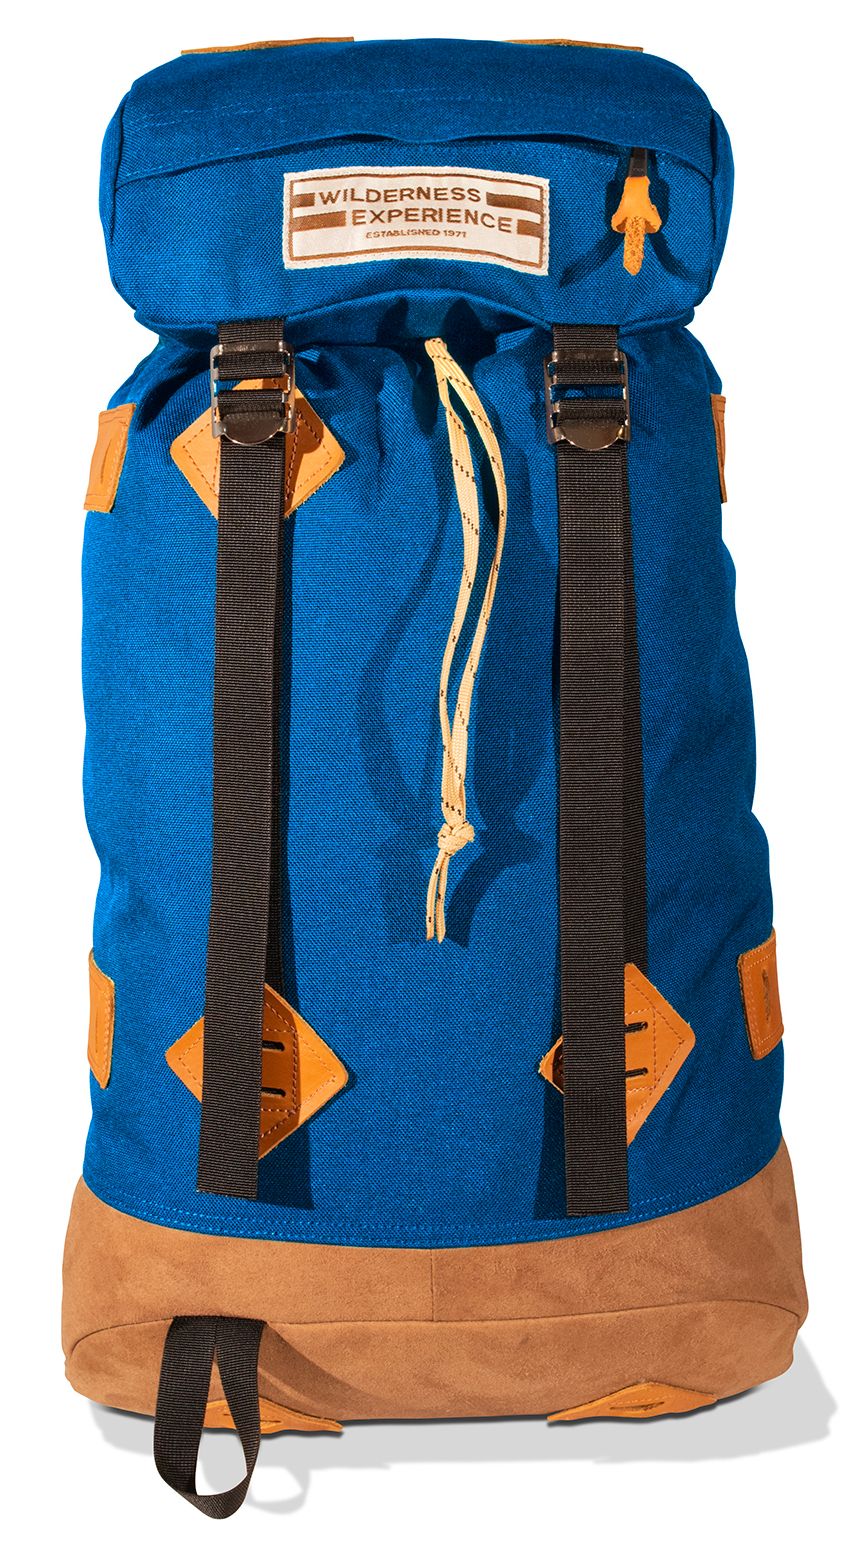 WILDERNESS EXPERIENCE KLETTERSACK w/ LEATHER BOTTOM